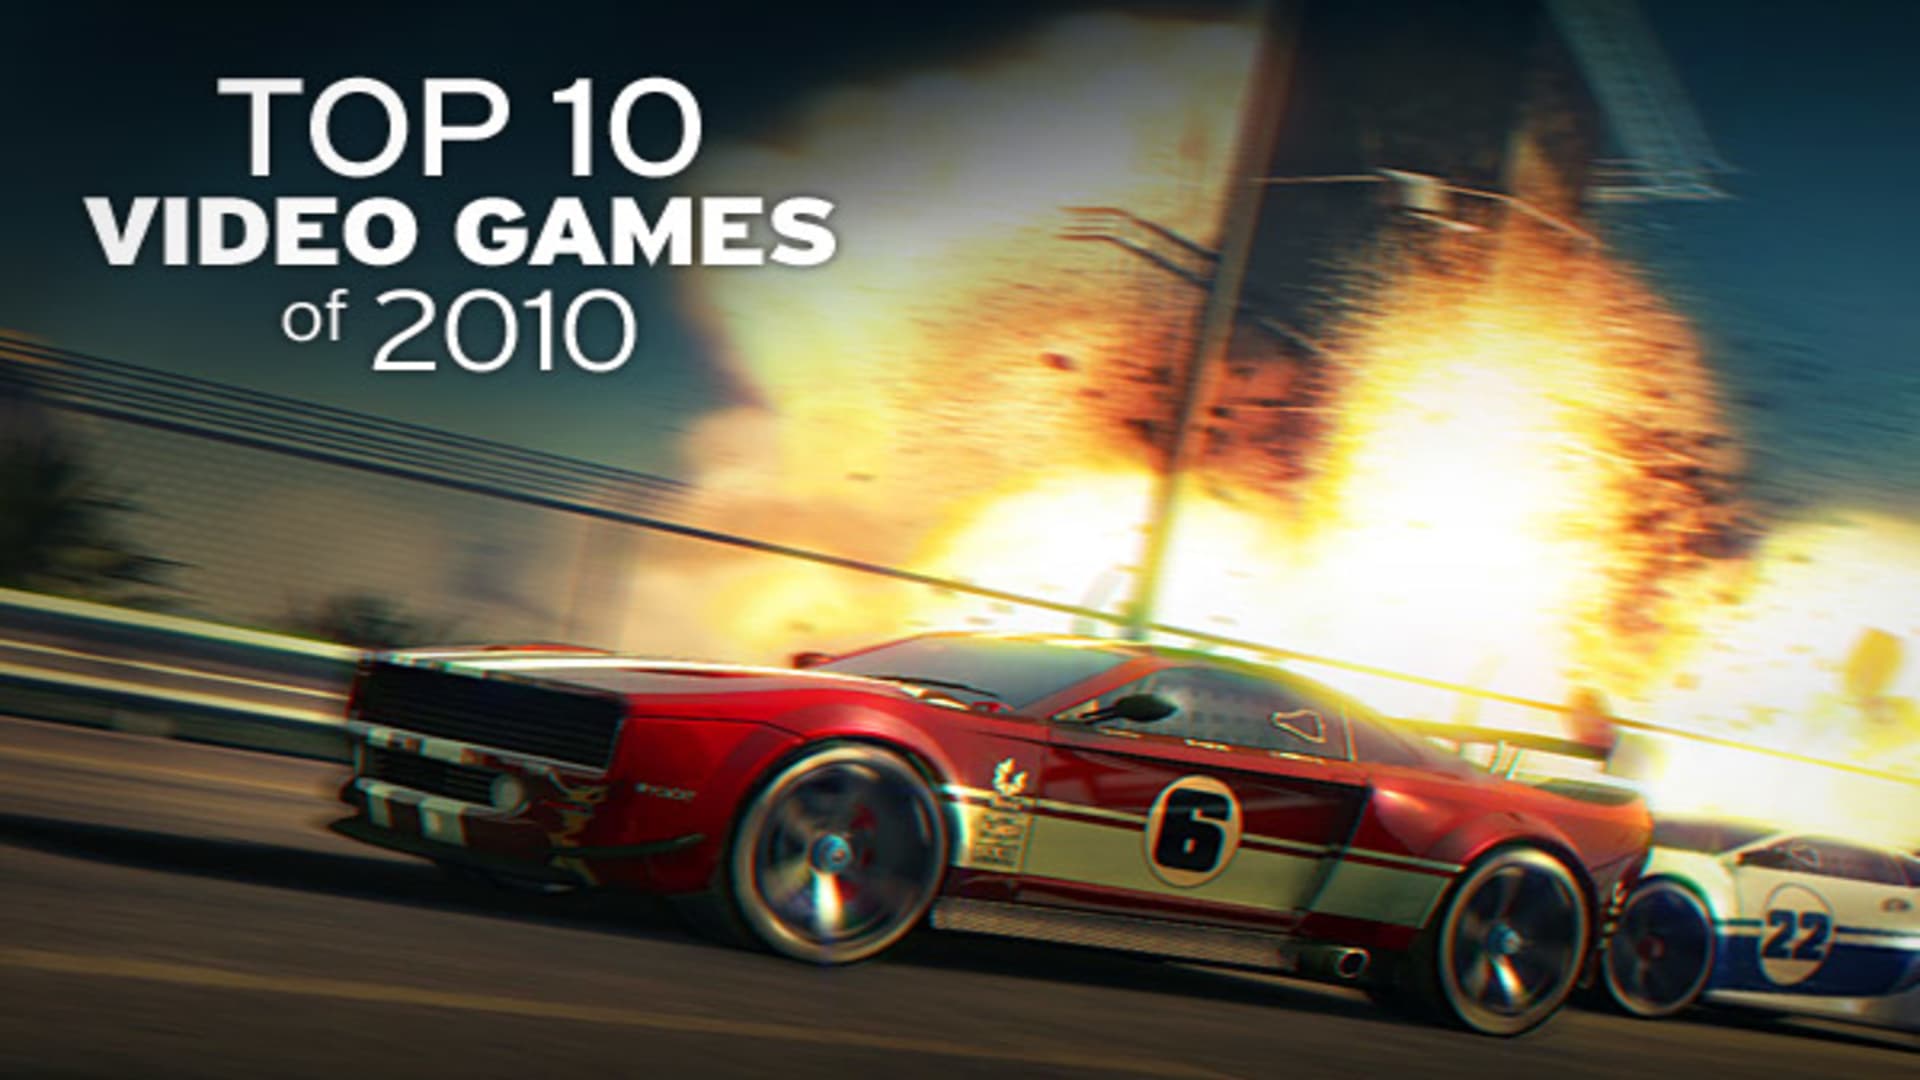 The Top 10 Games of